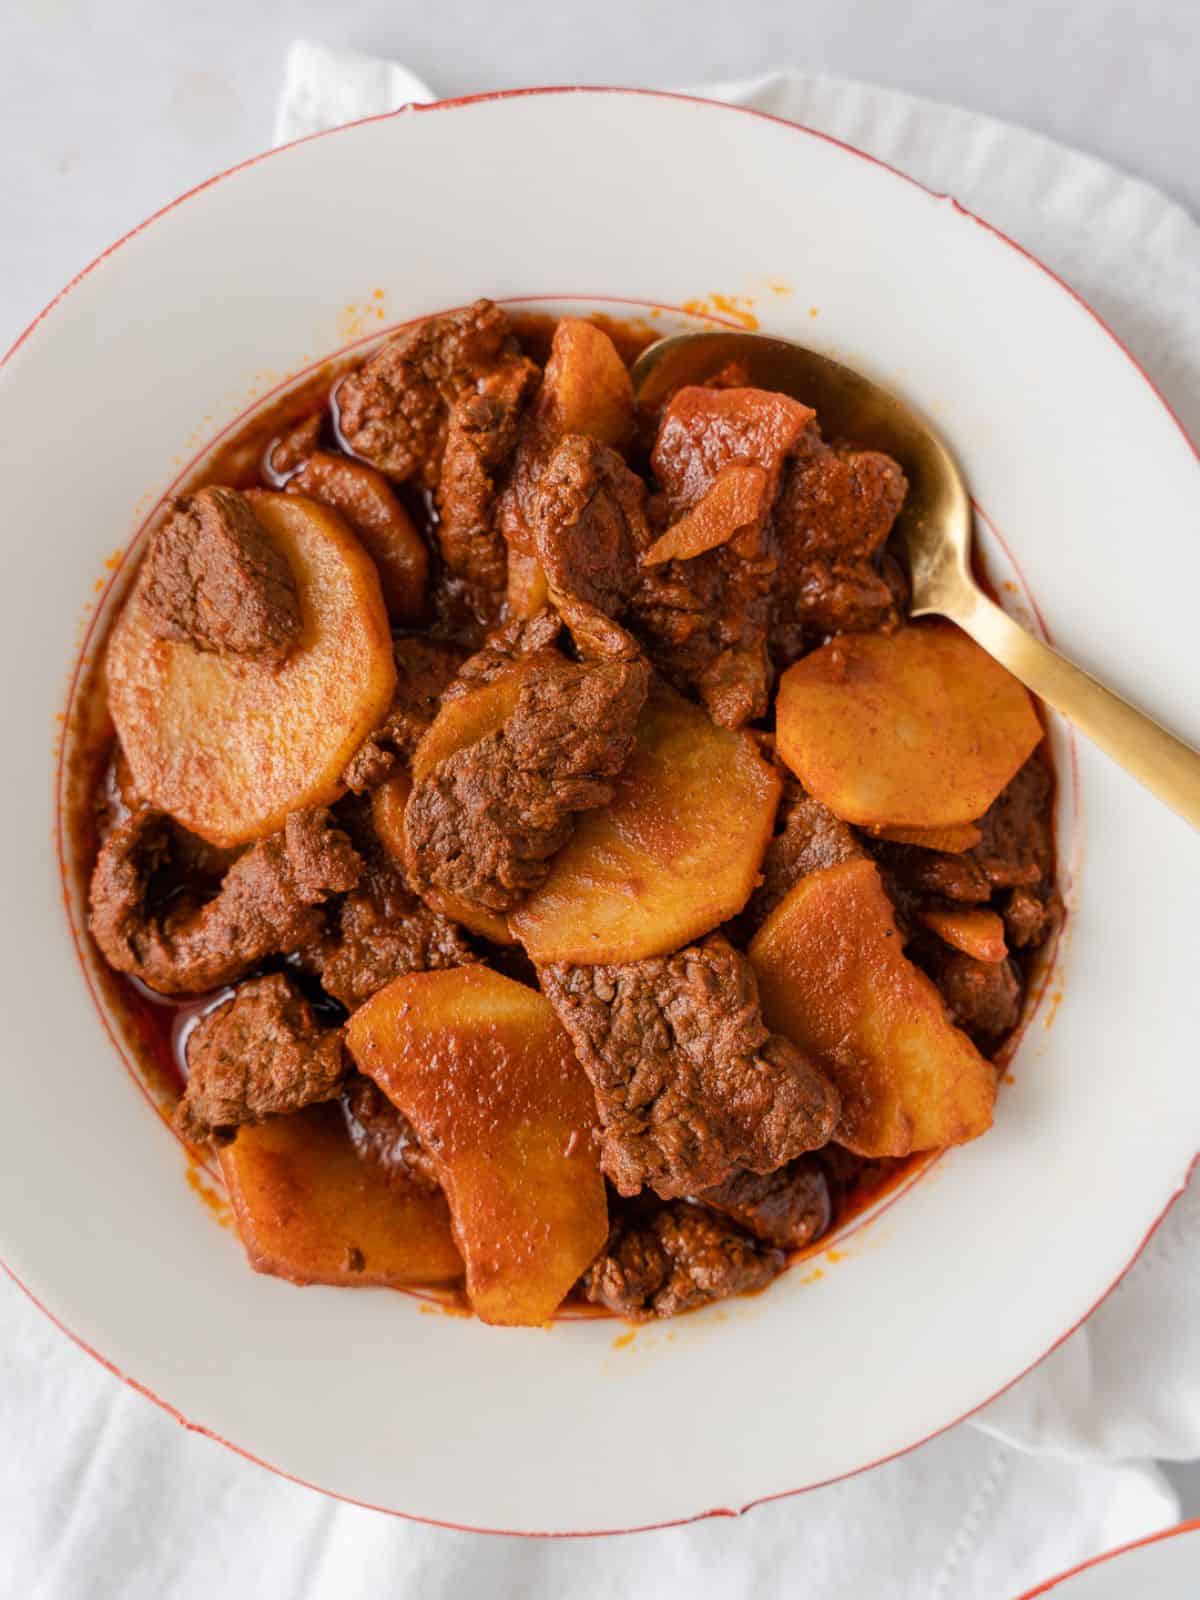 Beef and potatoes in a white bowl.